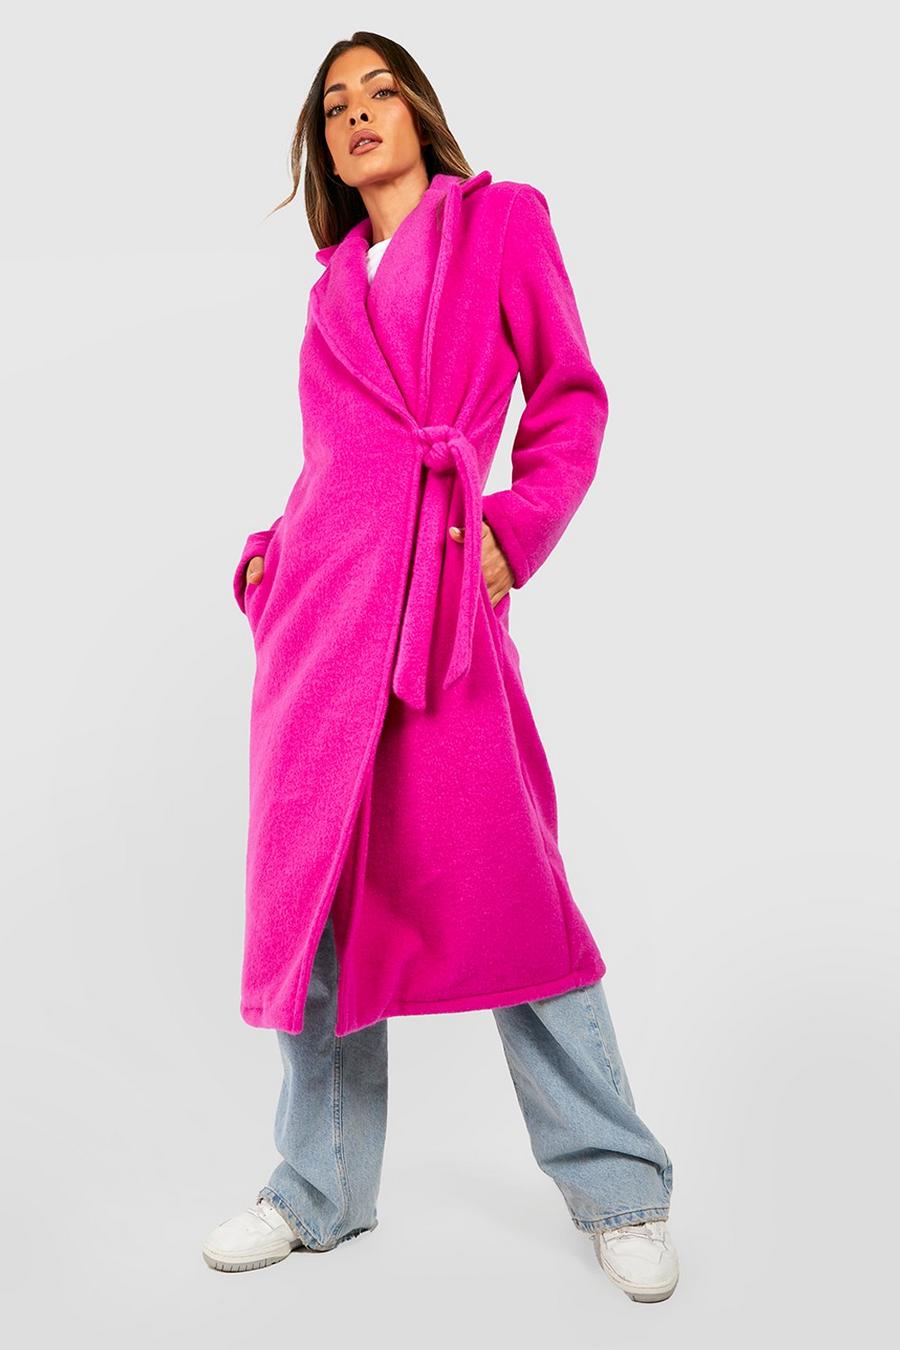 Bright pink Wool Look Textured Side Tie Oversized Coat image number 1